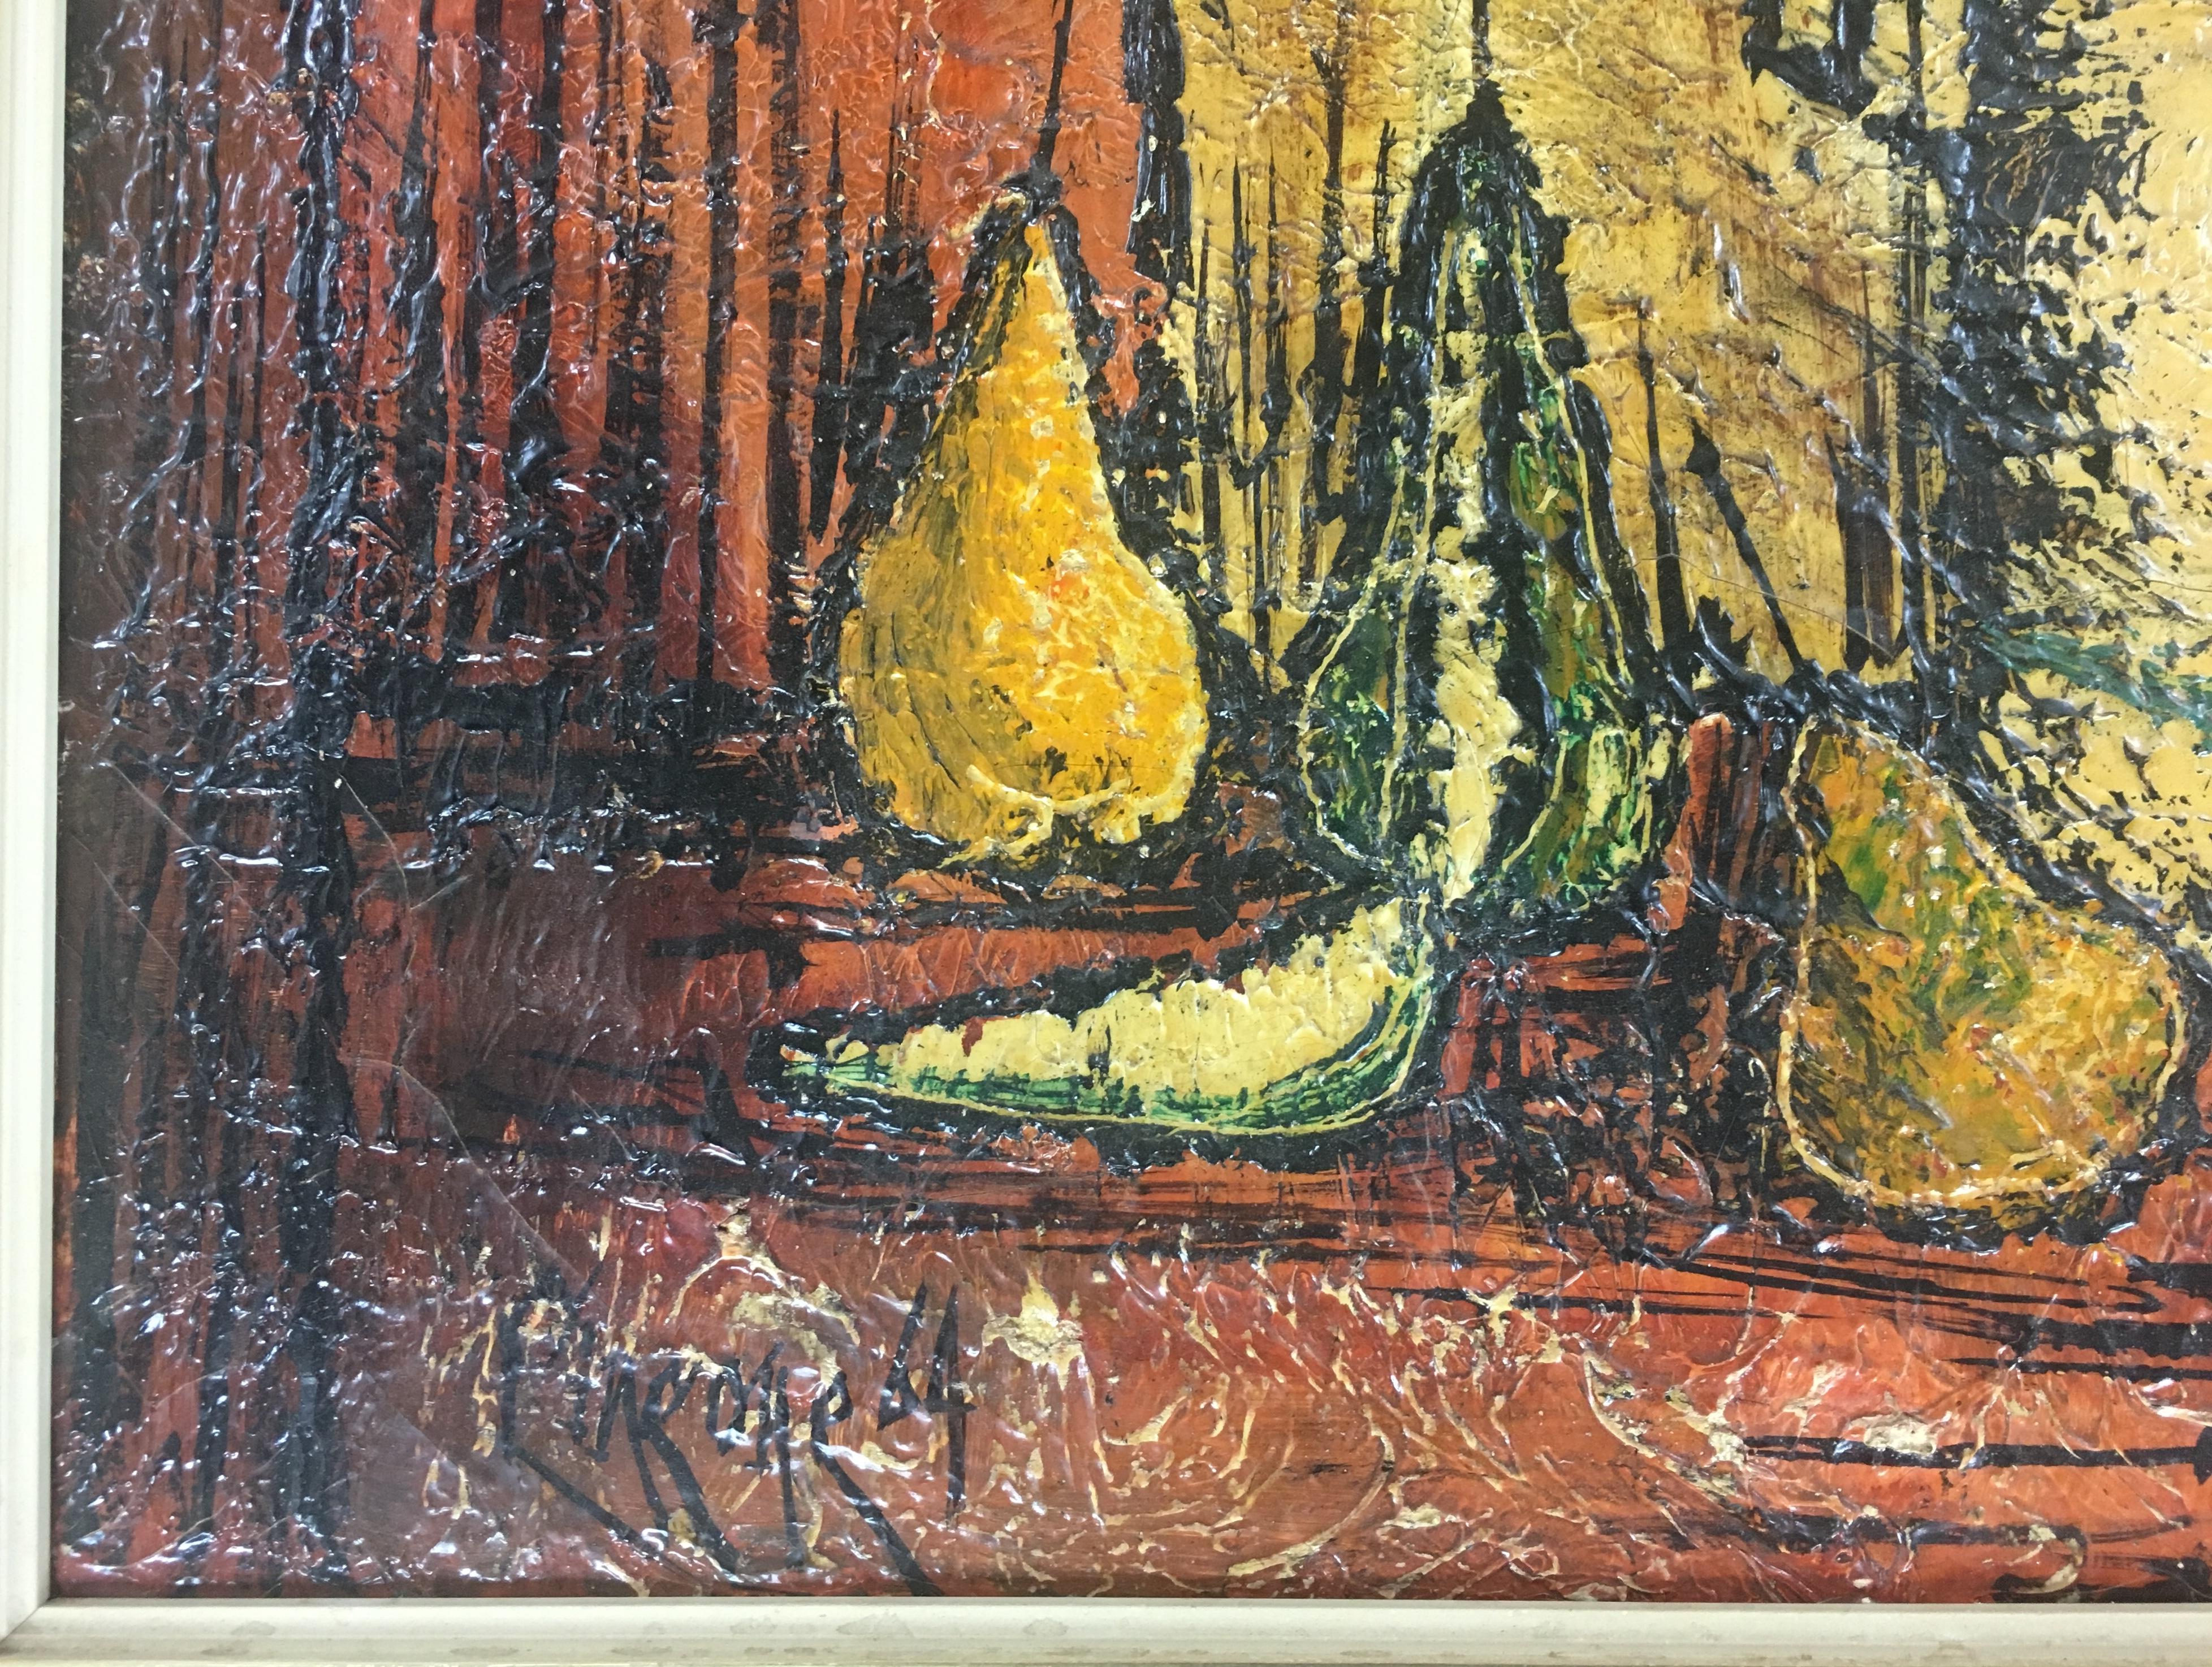 A framed oil on canvas painting by a French artist. Untitled, signed and dated 1964. 
Signature appears to be C. Marone. 

This superb example in the like of Bernard Buffet's work is in absolute original in very good condition. It has very vibrant